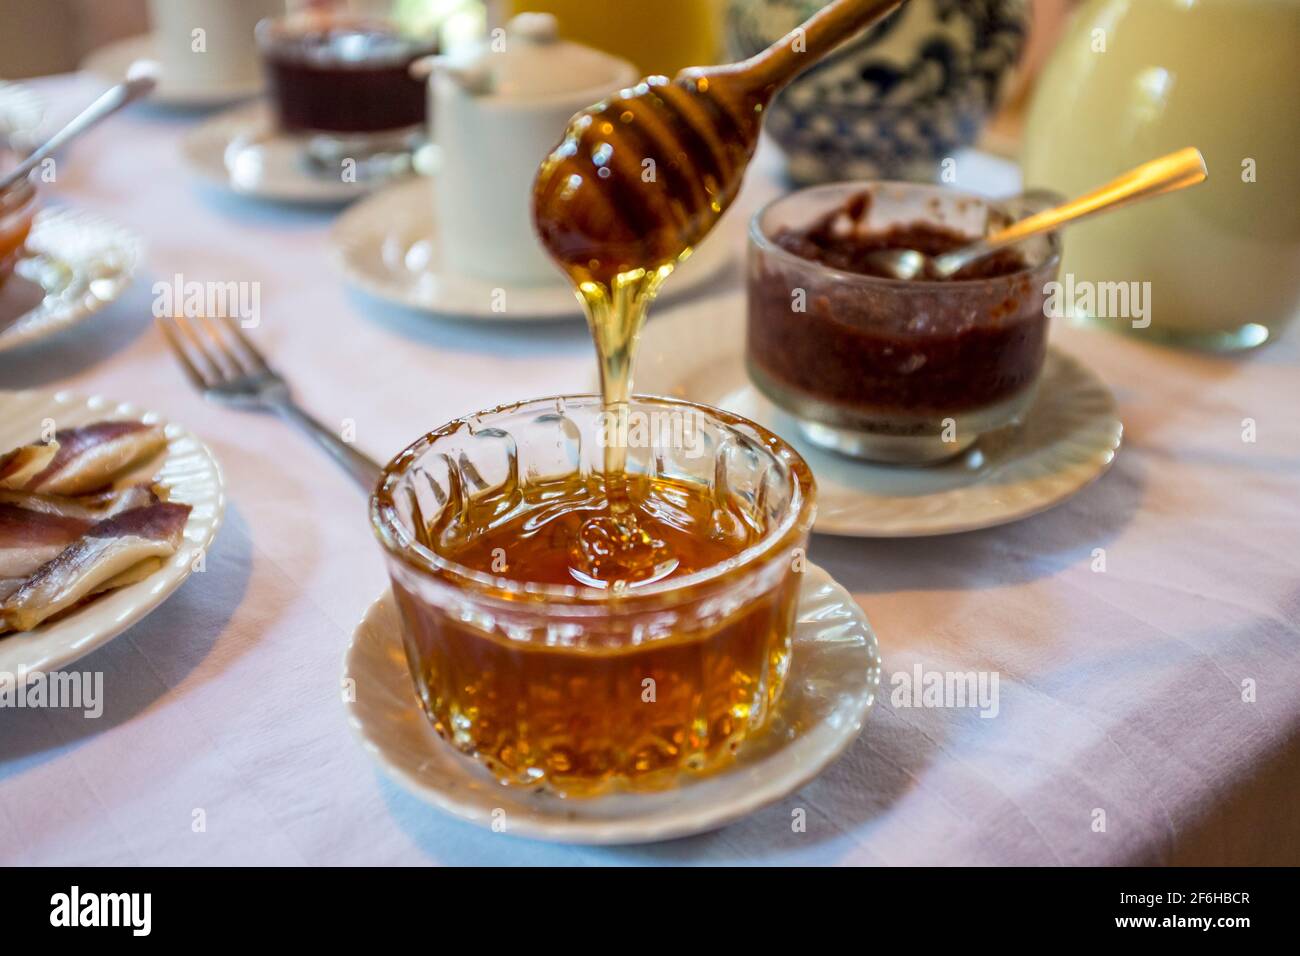 A honey dipper getting honey out of a glass jar as served for breakfast in rural Transylvania Stock Photo